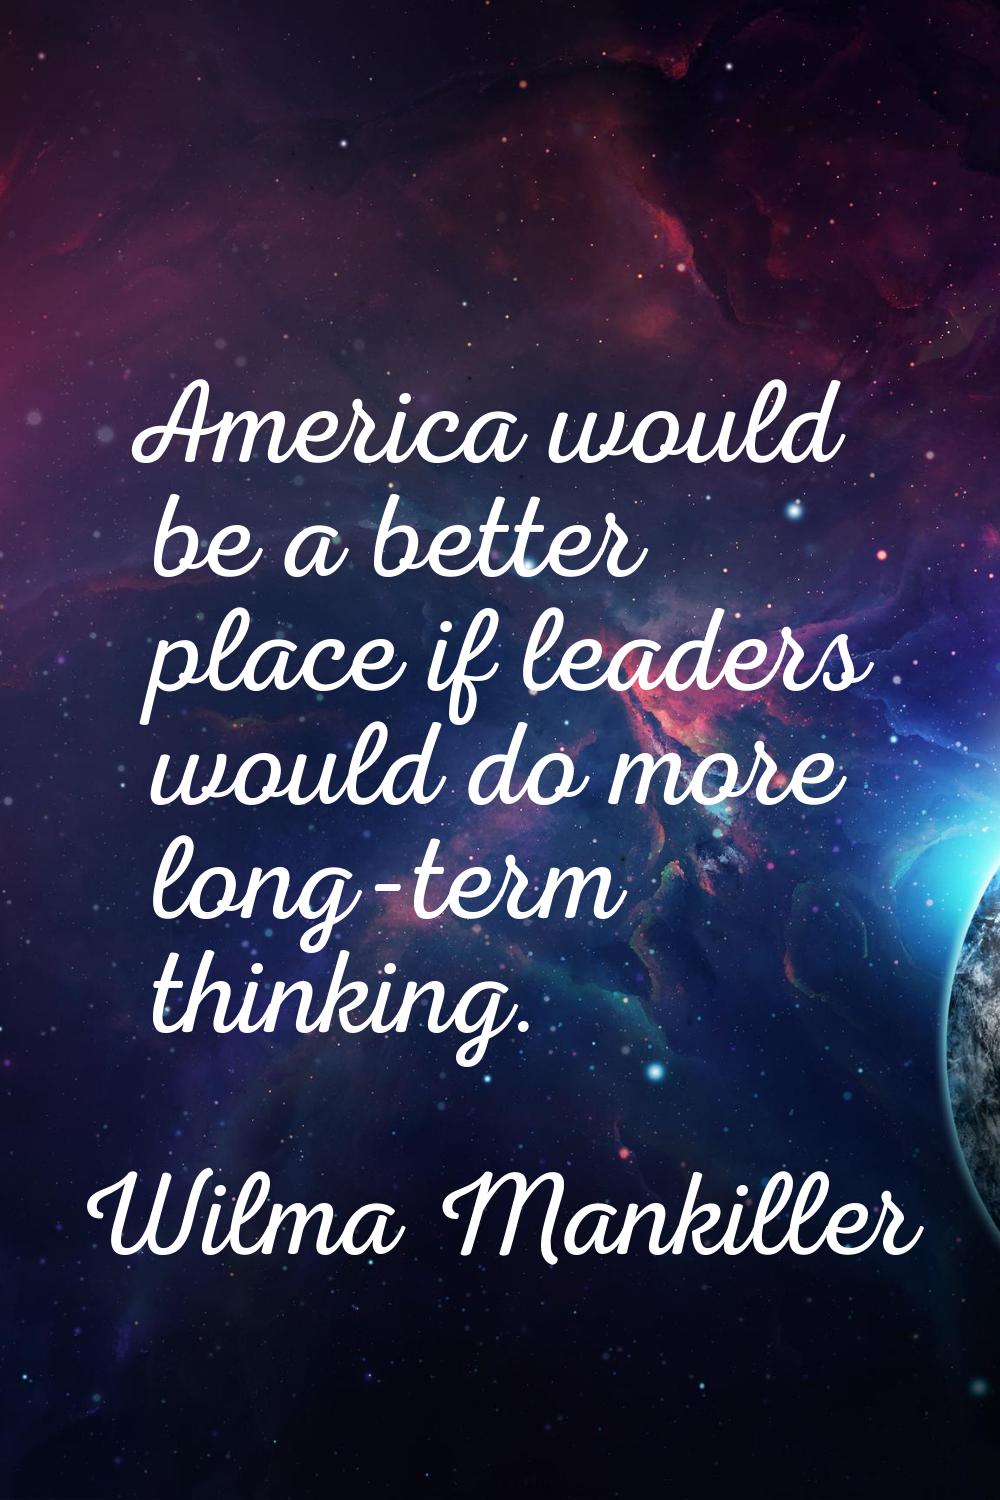 America would be a better place if leaders would do more long-term thinking.